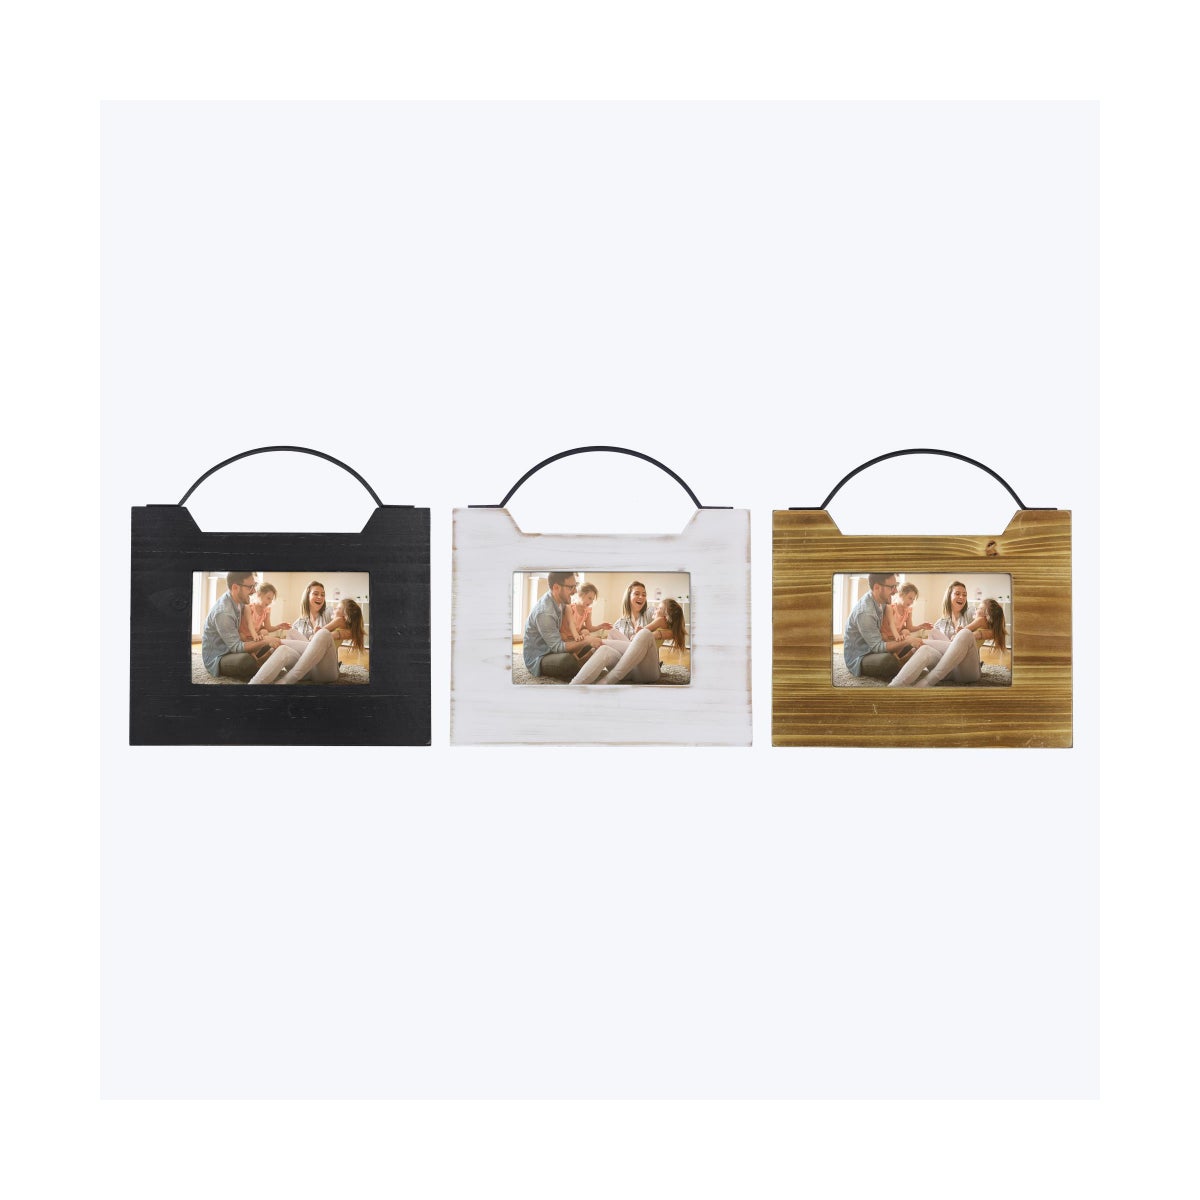 Wood 4x6 Photo Frame with Metal Handle, 3 Assortment